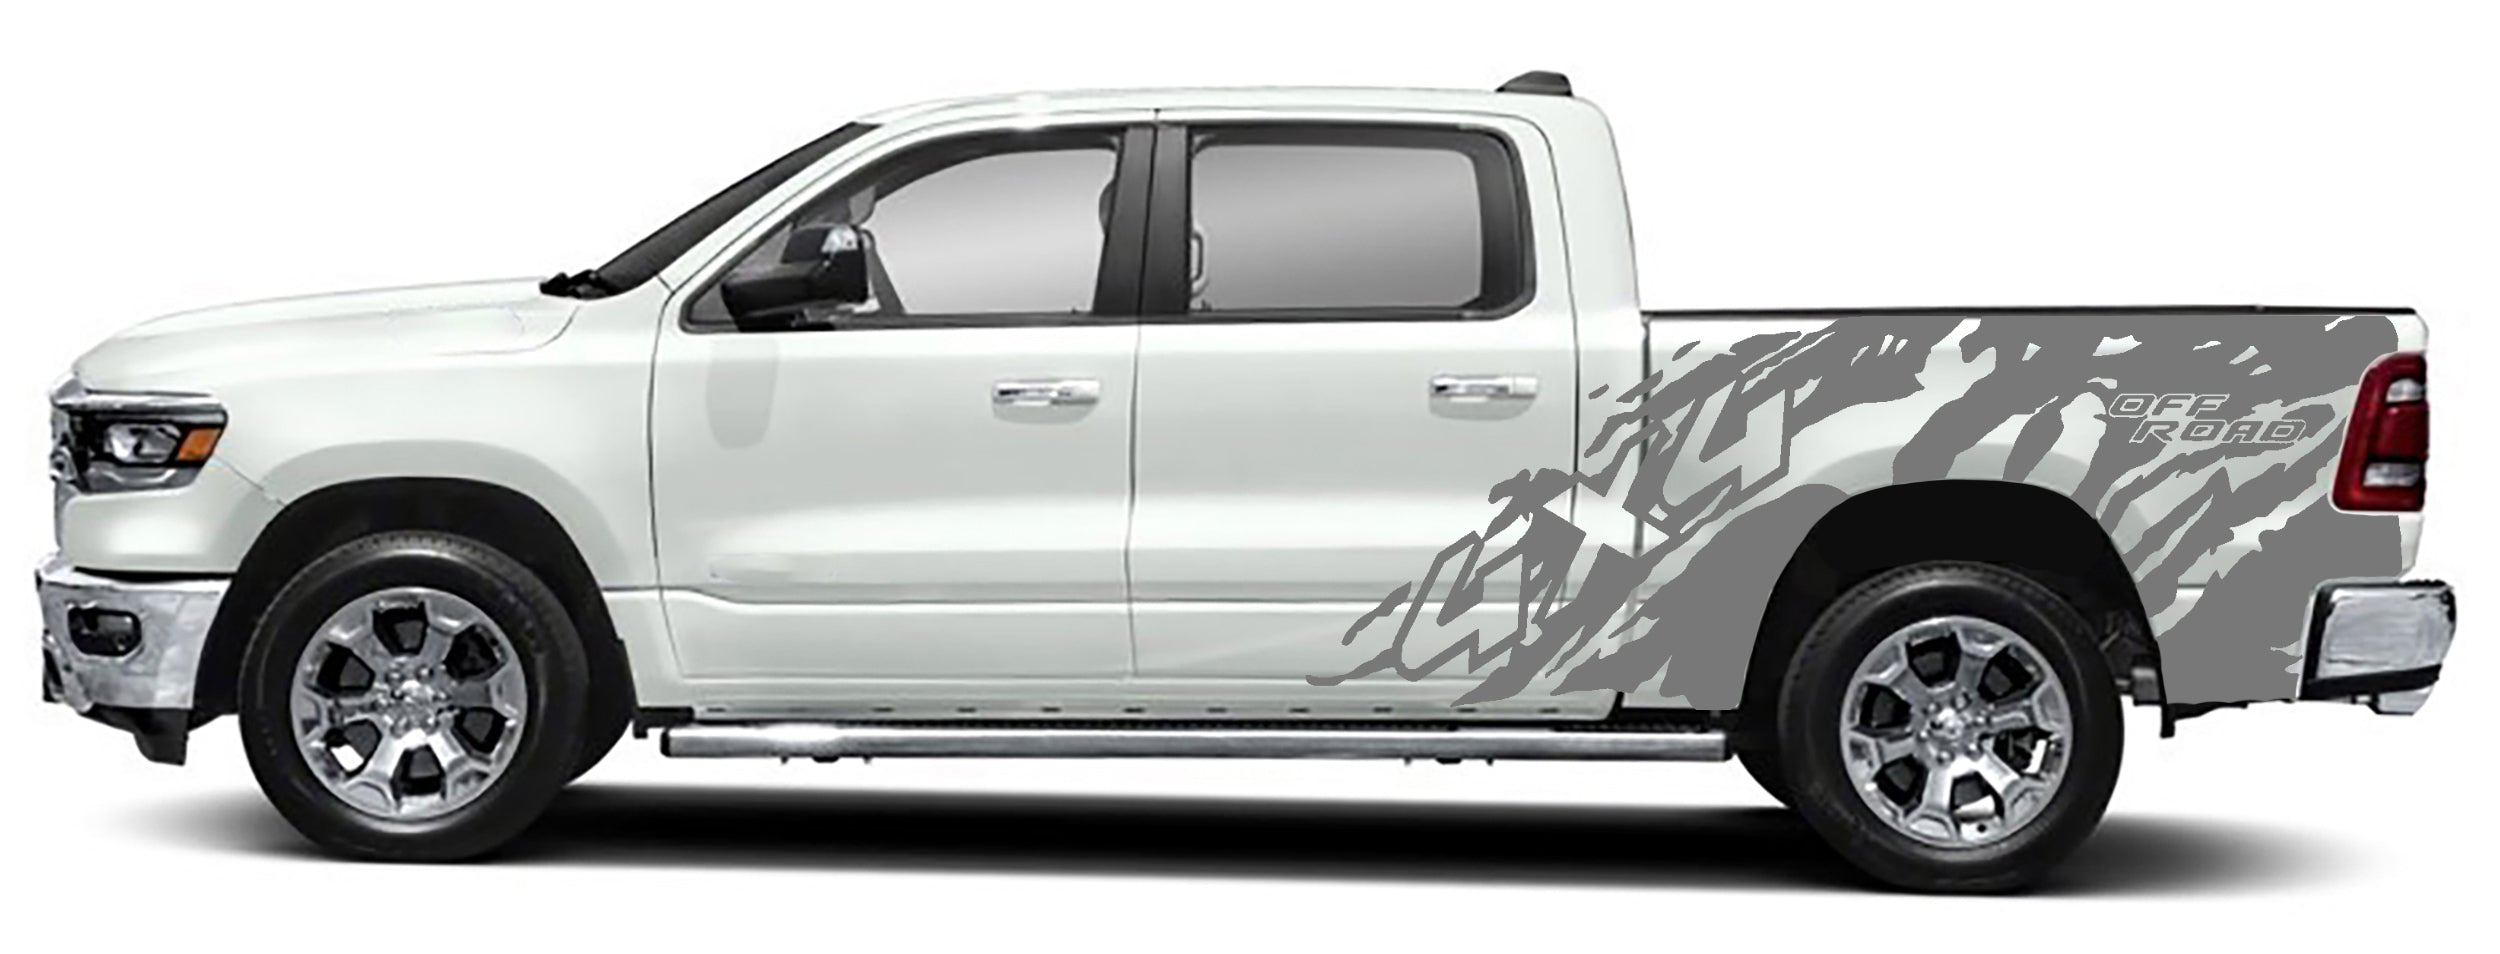 4x4 off road side graphics for dodge ram 1500 2500 2019 to 2023 models gray